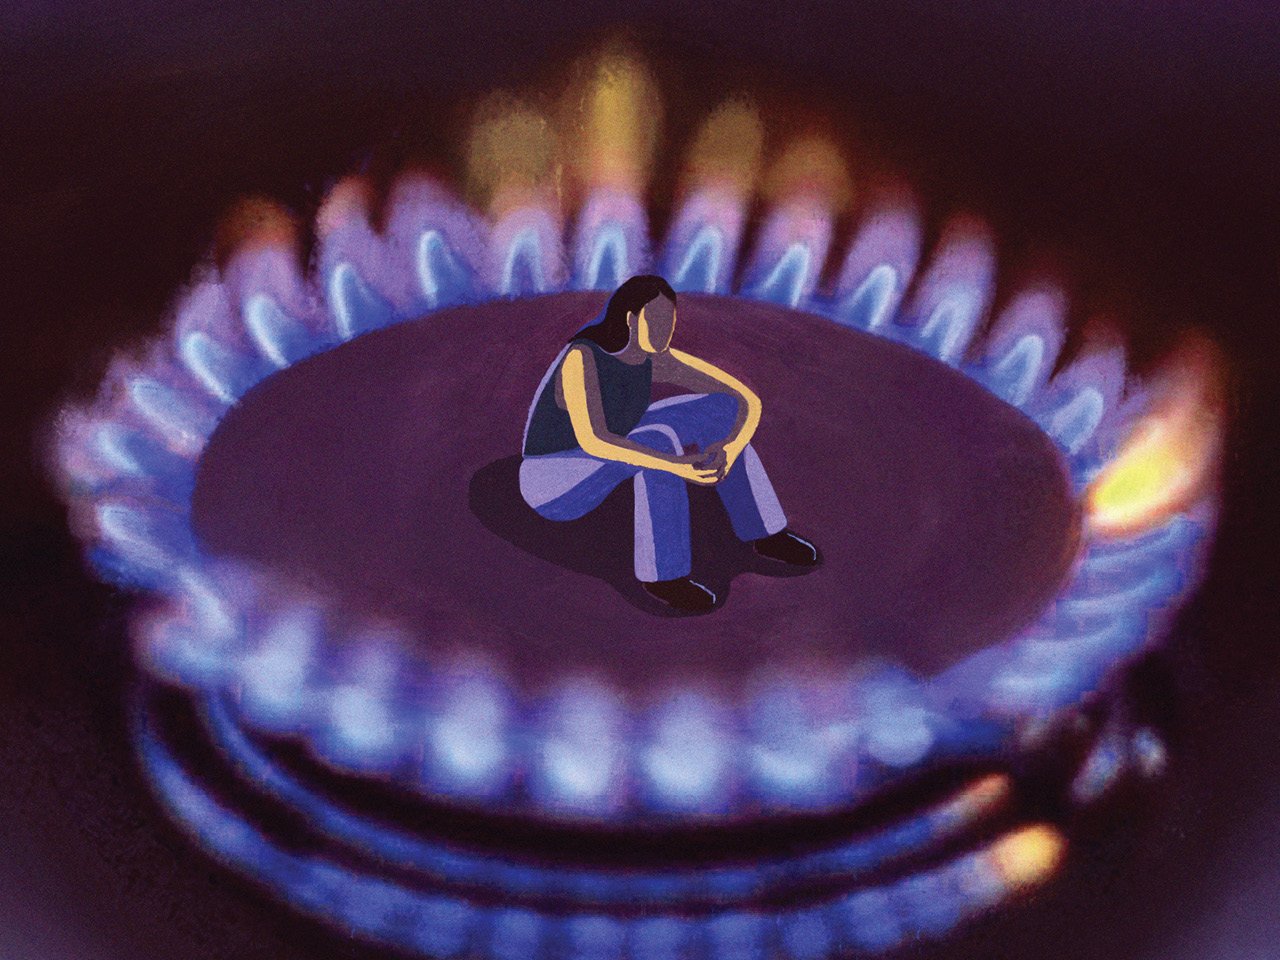 Illustration of women sitting on a purple floor surrounded by match flames.